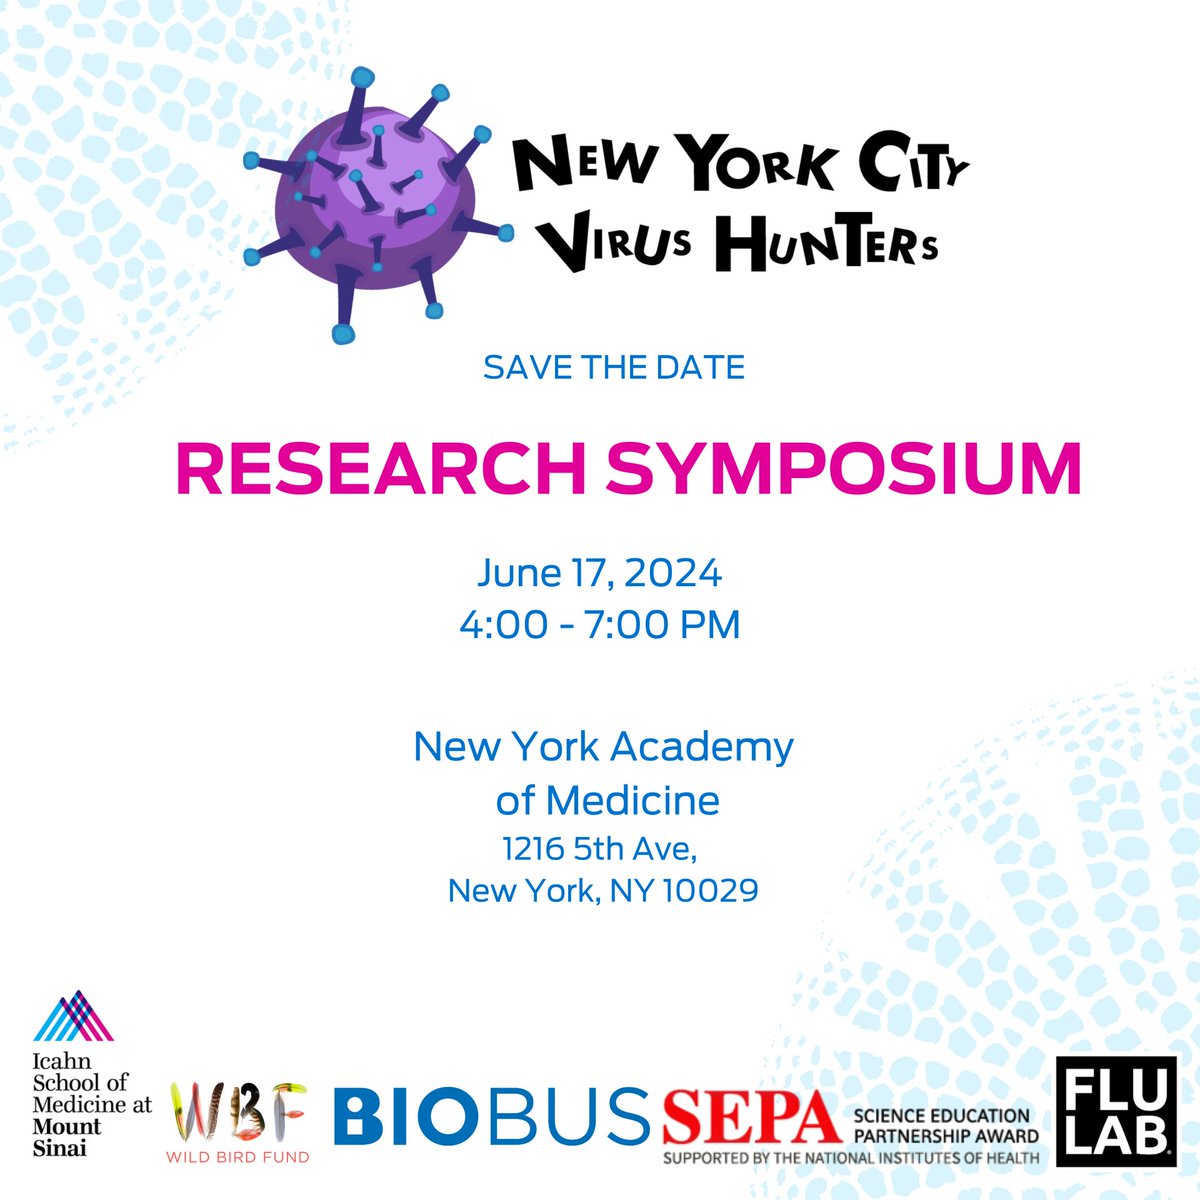 I am happy to announce our annual New York City Virus Hunters Research Symposium. Join us if you want to learn about our community science program that looks for viruses in birds in New York City. Our students will present our newest data. redcap.mountsinai.org/redcap/surveys…